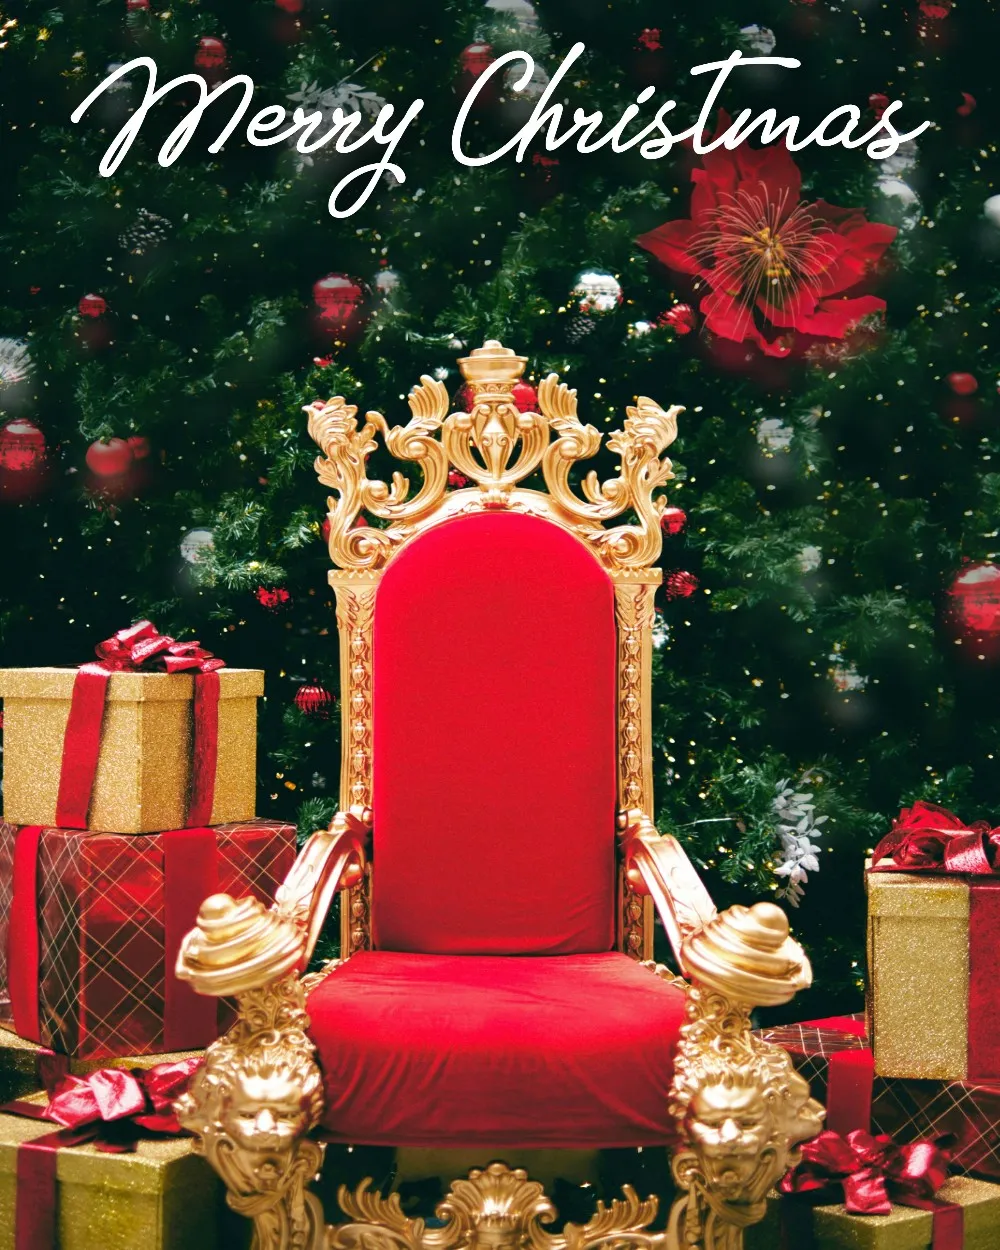 You are currently viewing Merry Christmas background (sitting chair) picture download